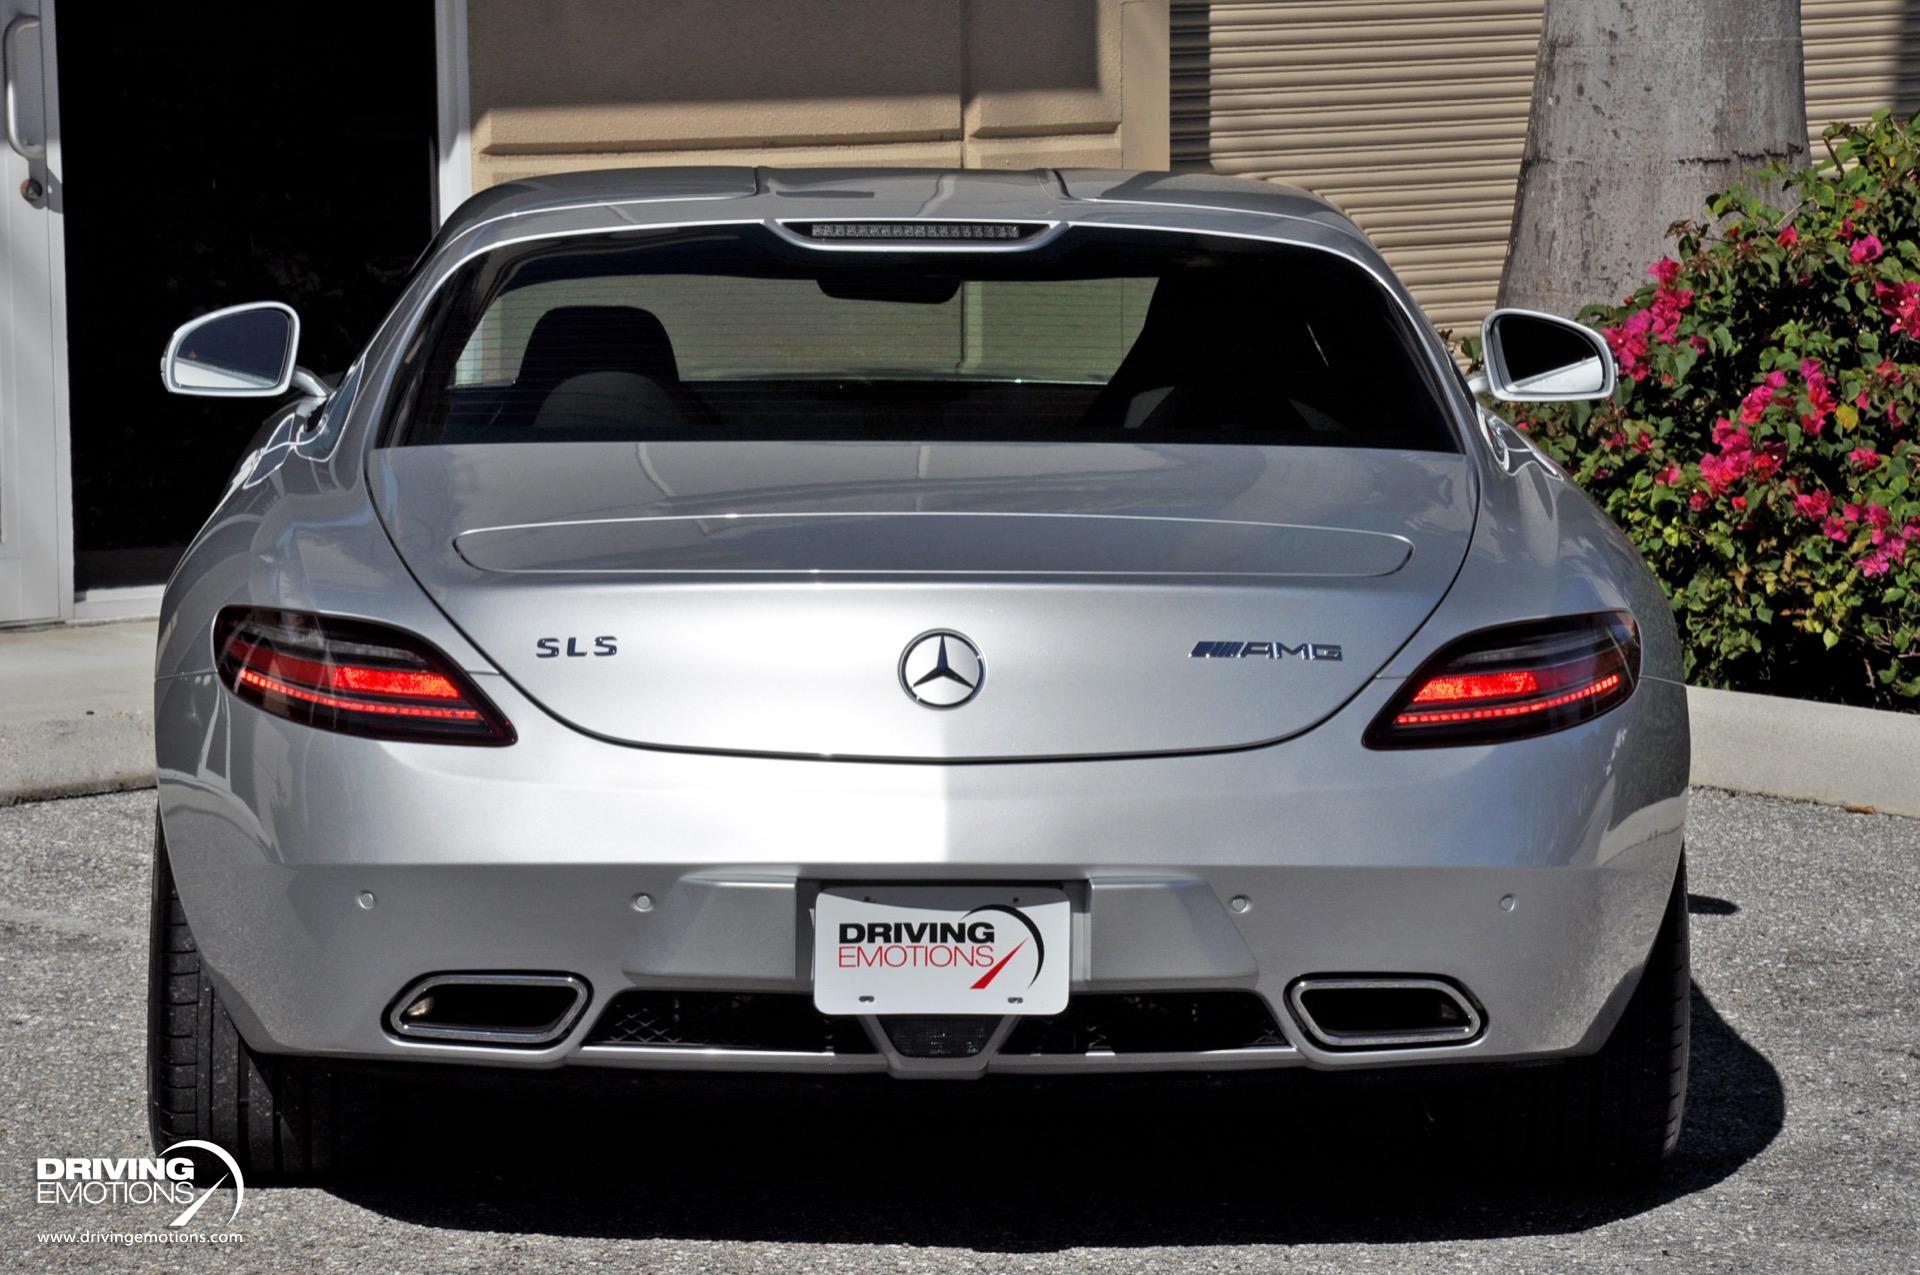 Used 2012 Mercedes-Benz SLS AMG Coupe Gullwing! SILVER/RED! COLLECTOR!! | Lake Park, FL